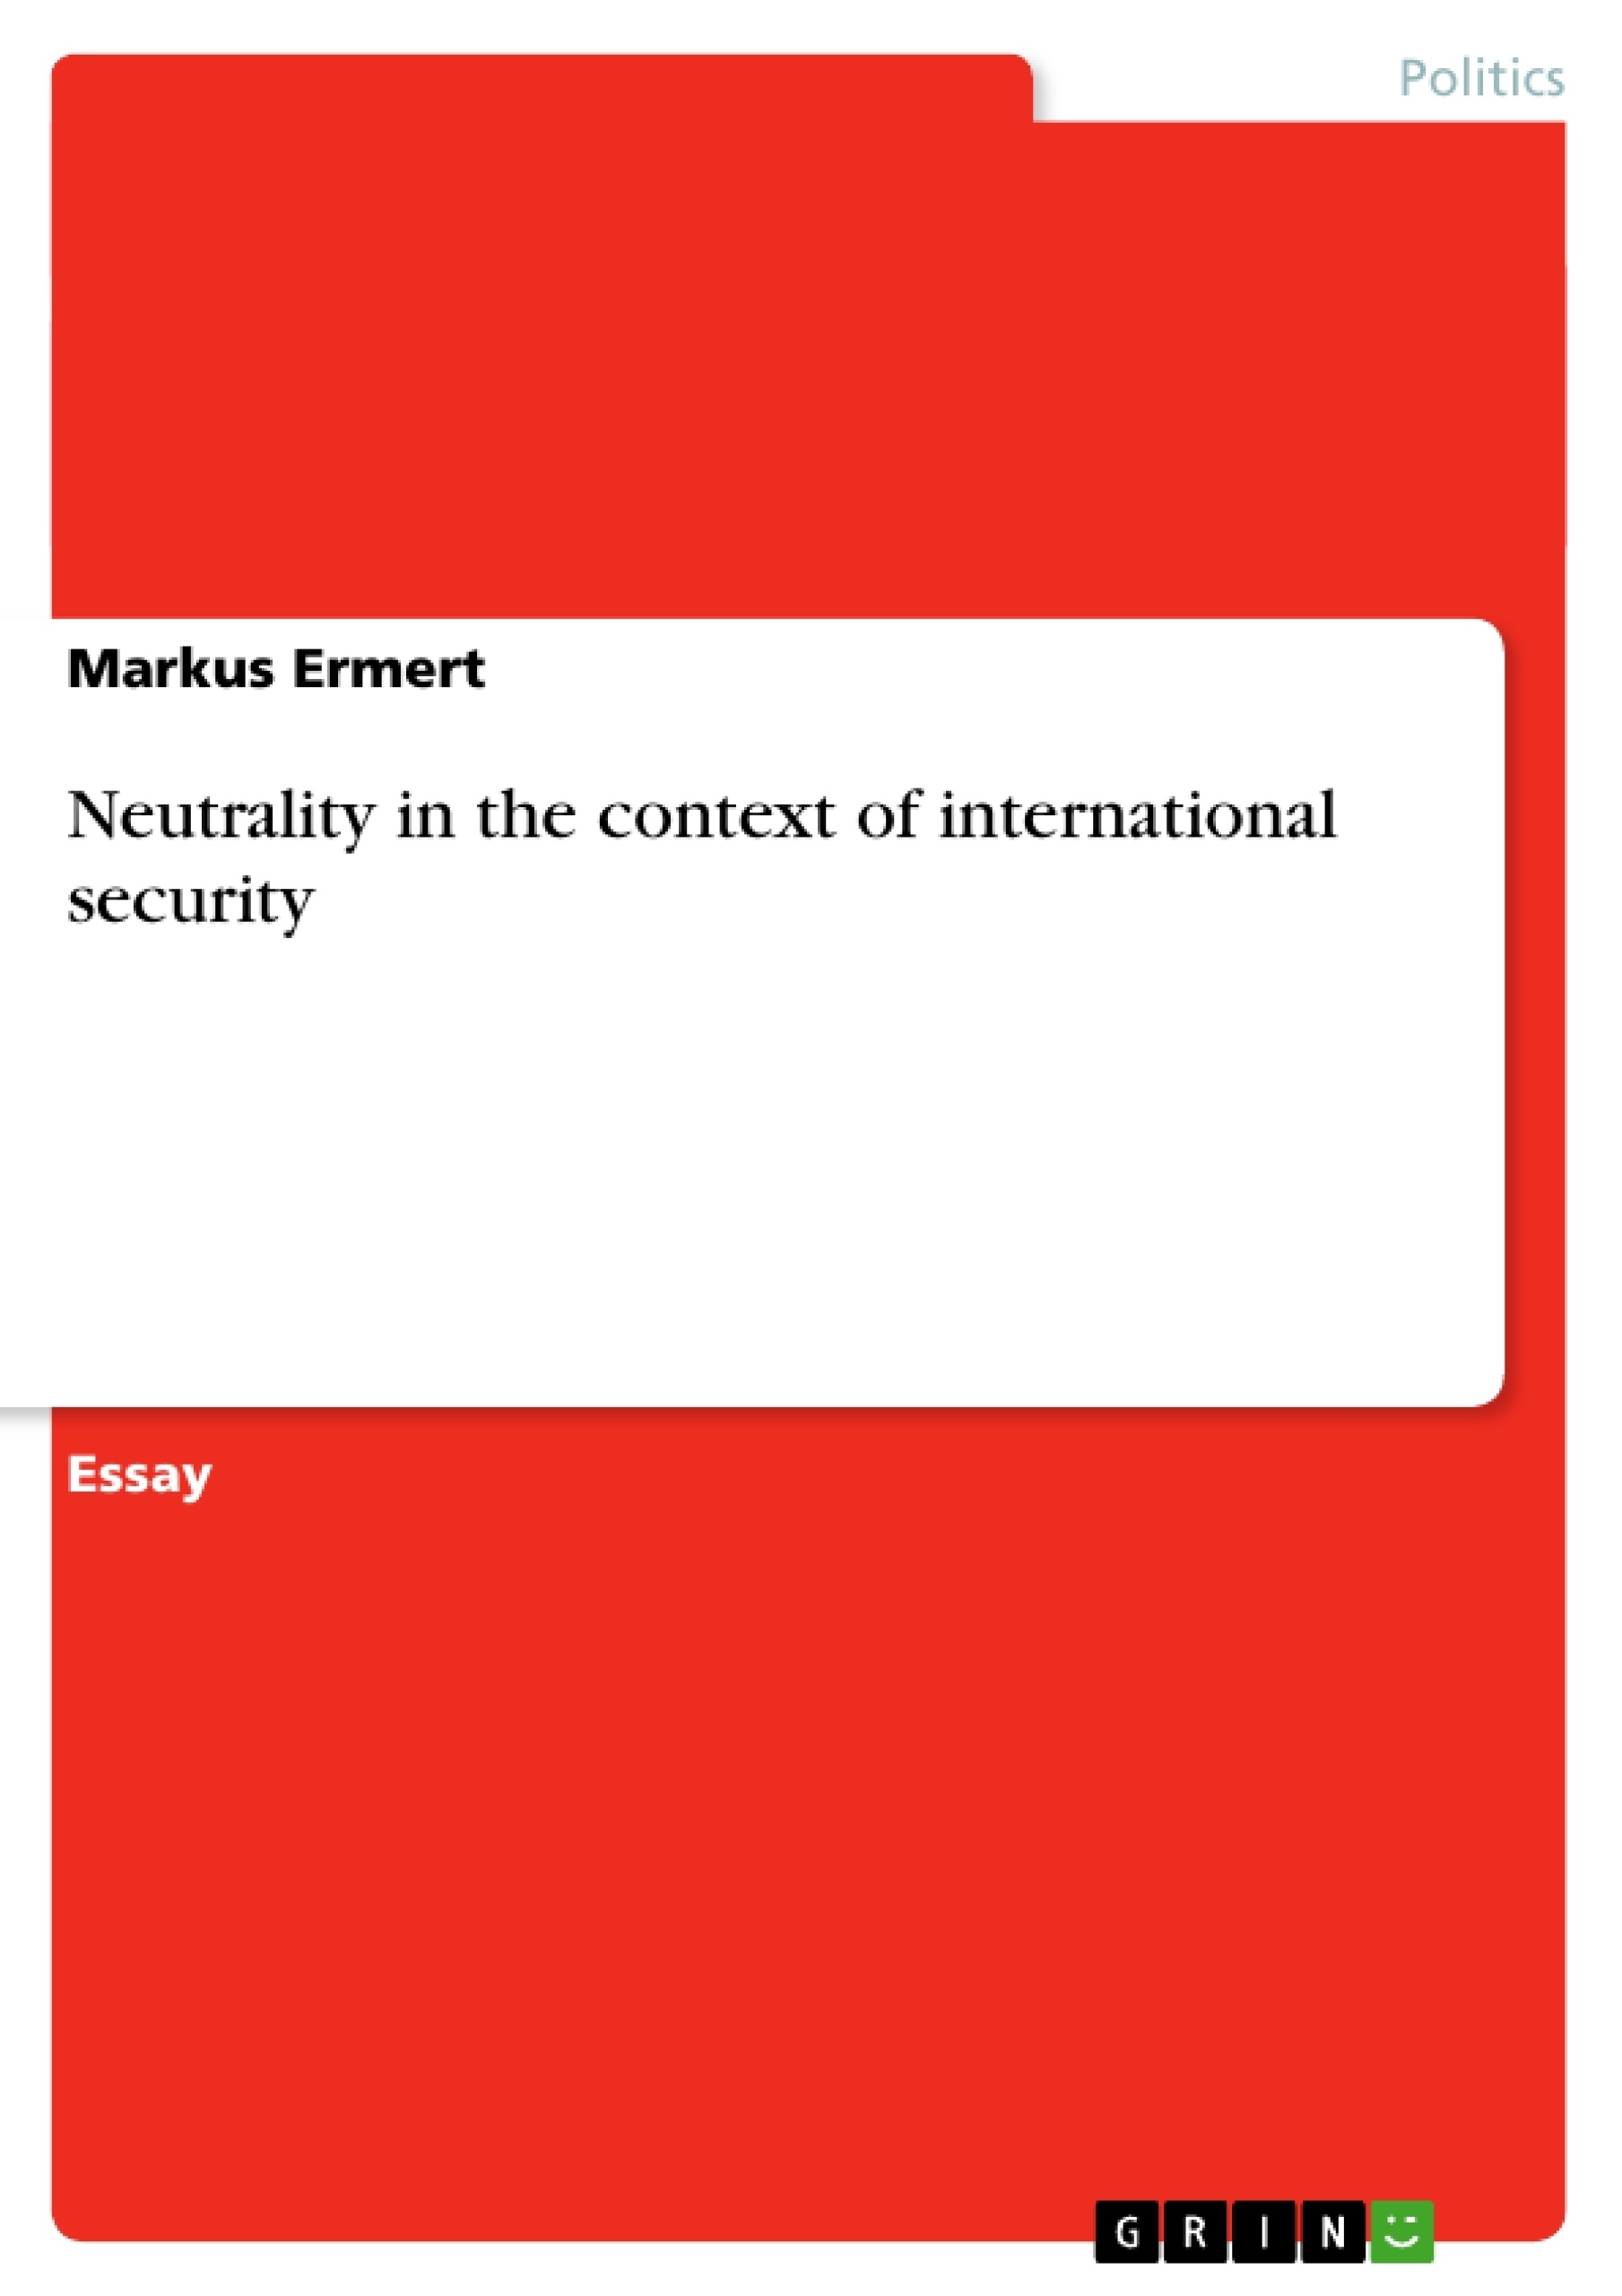 Title: Neutrality in the context of international security